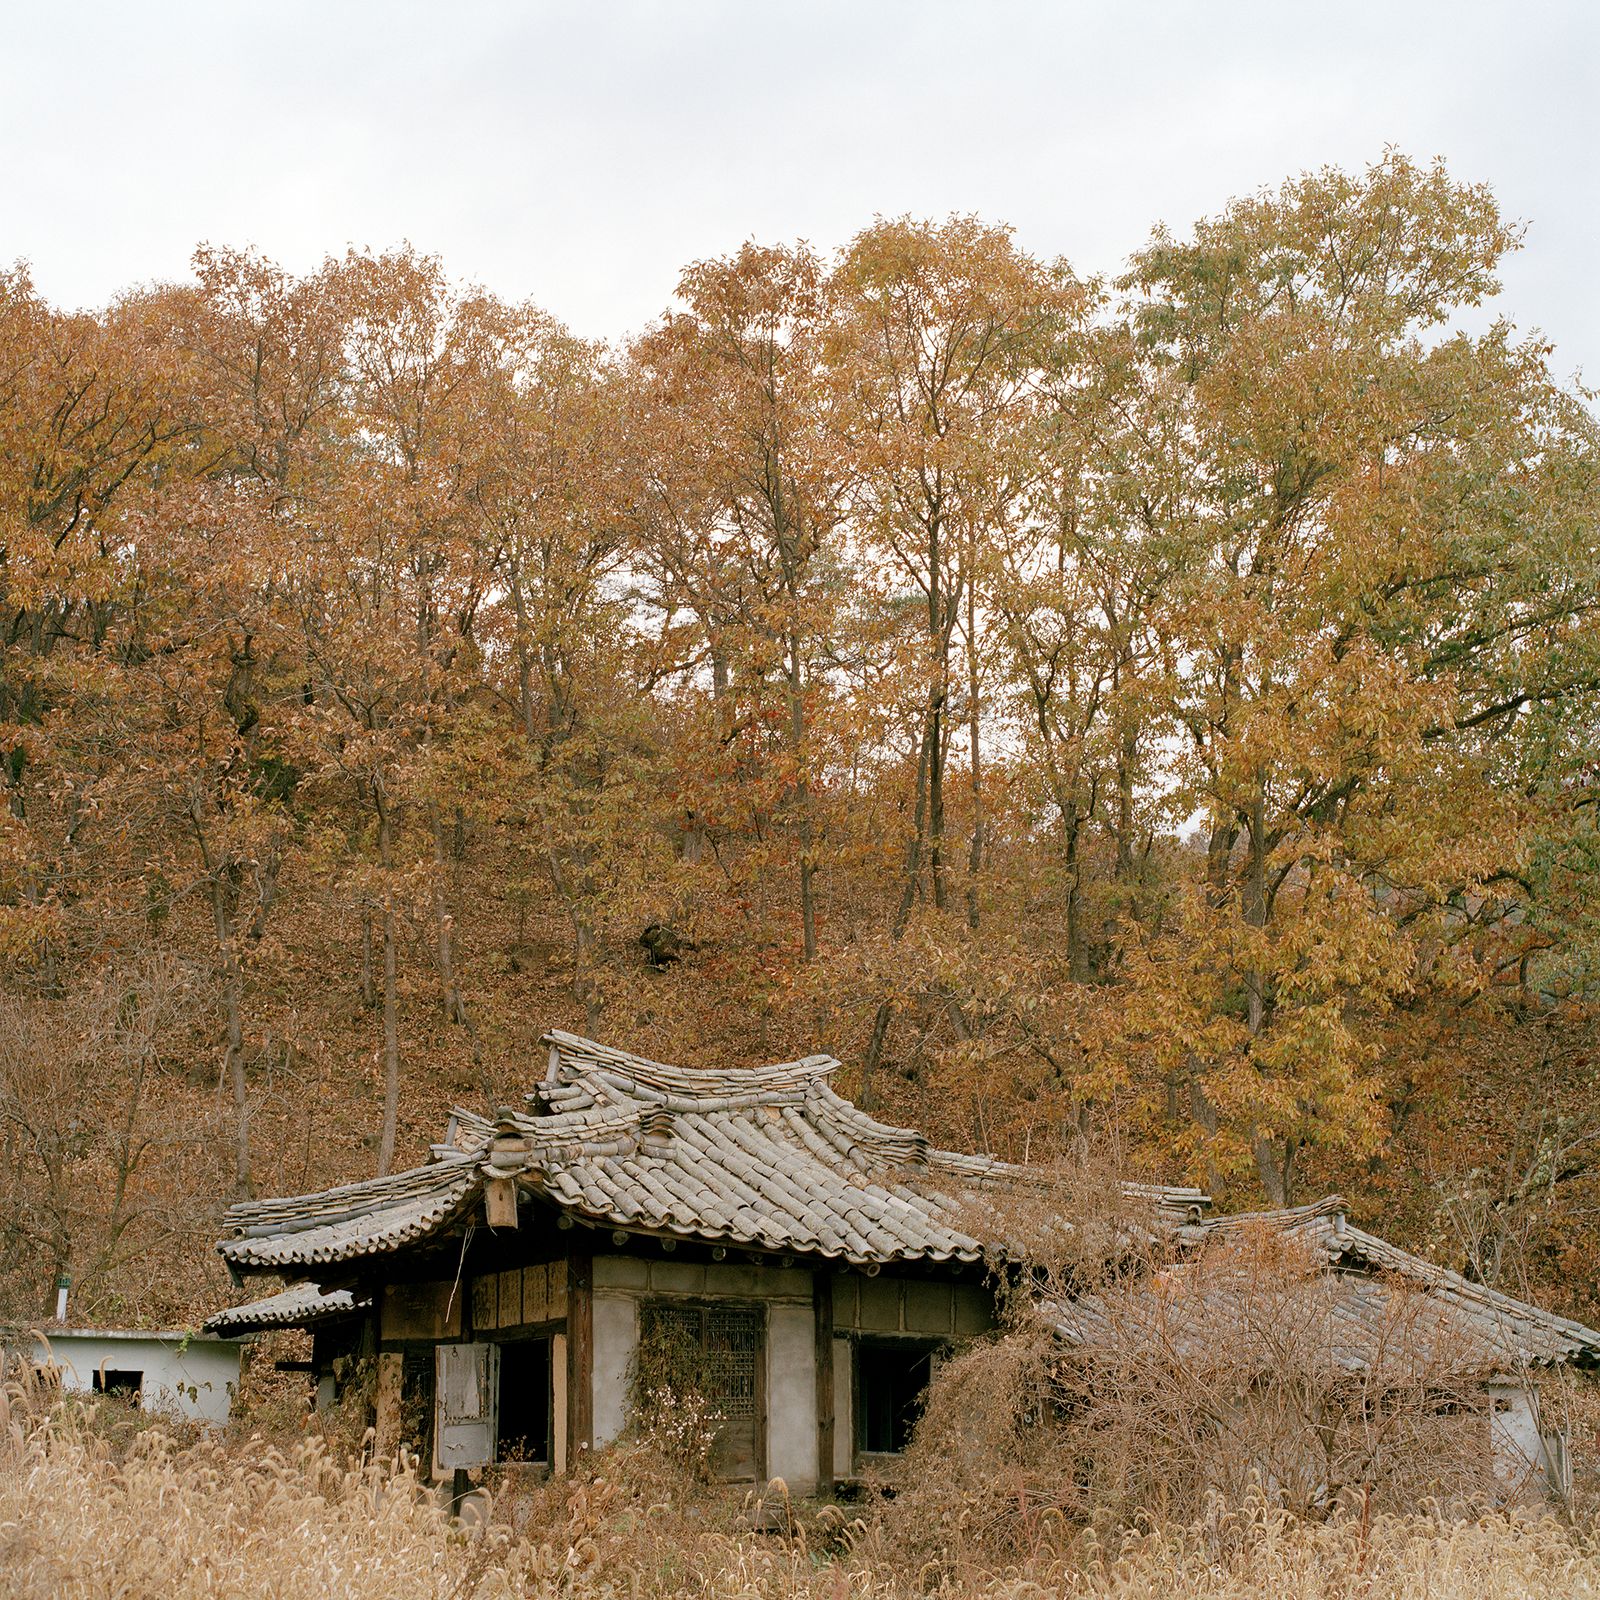 © Lee Grant - Abandoned hanok home in Gangwon-do province which borders North Korea